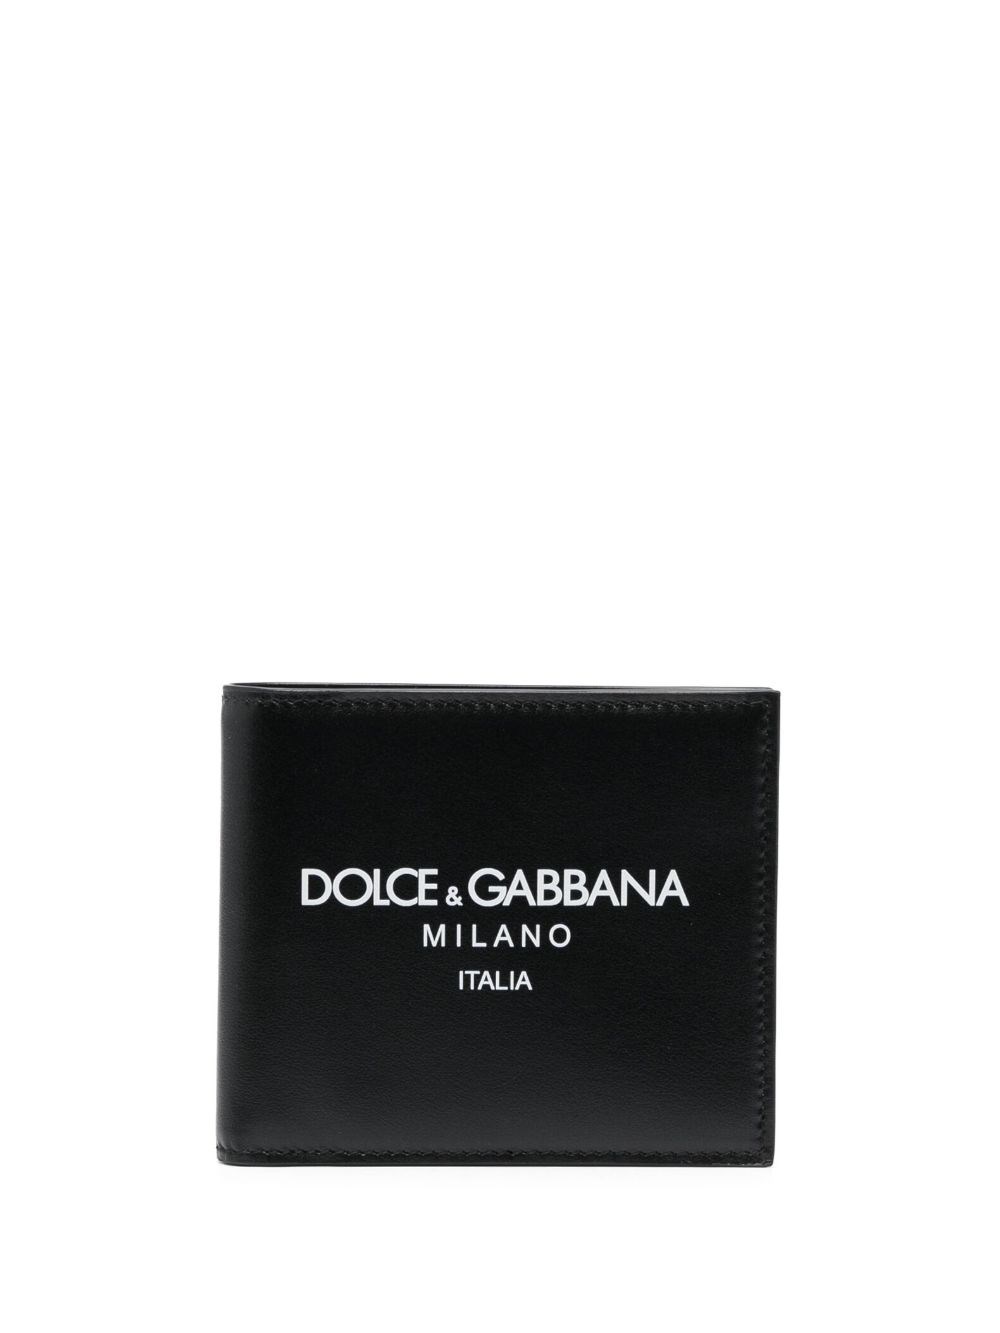 Dolce & Gabbana Wallet With Print In Black